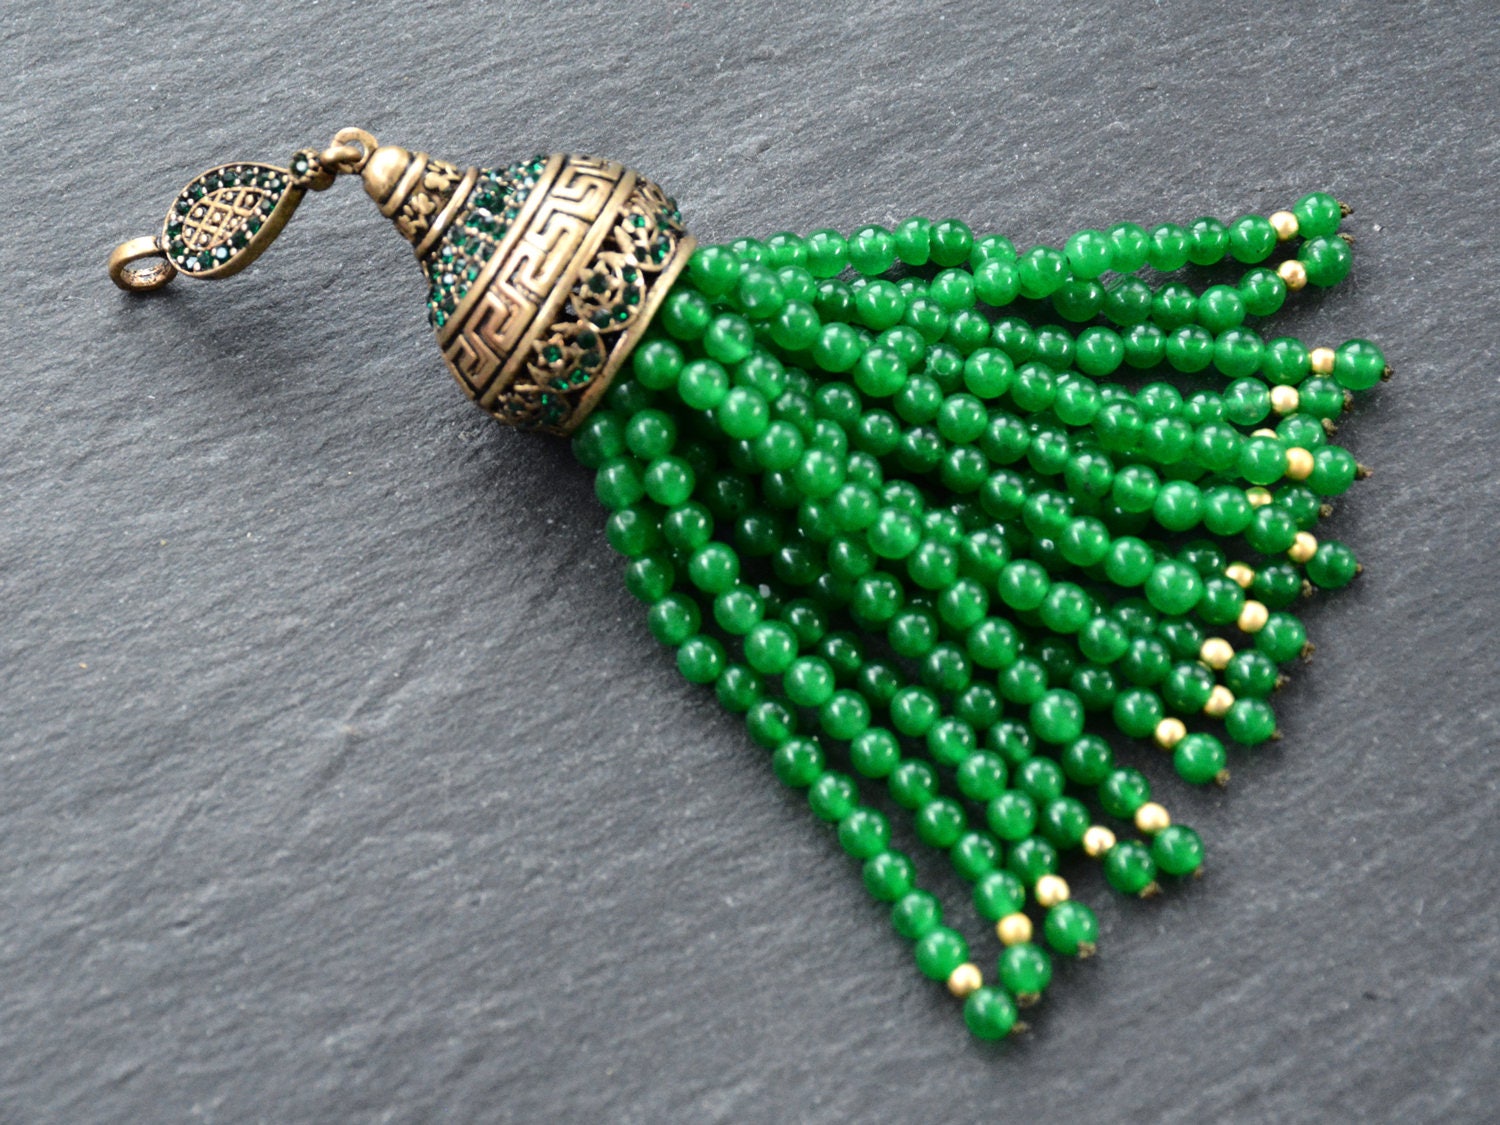 Antique Bronze Large Long Deep Smokey Blue Facet Cut Jade Stone Beaded Tassel with Green Clear Crystal Accents 1PC